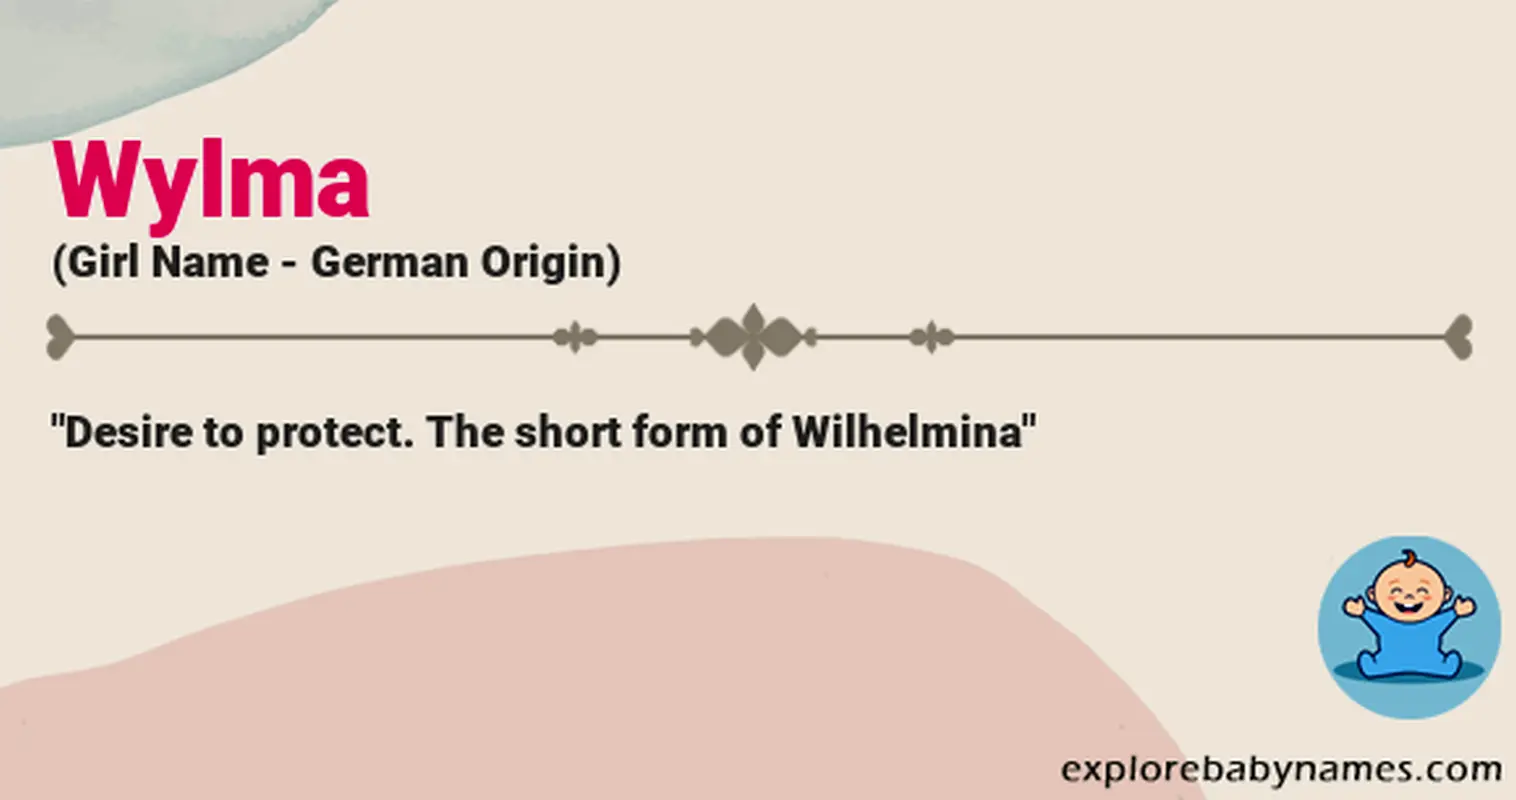 Meaning of Wylma